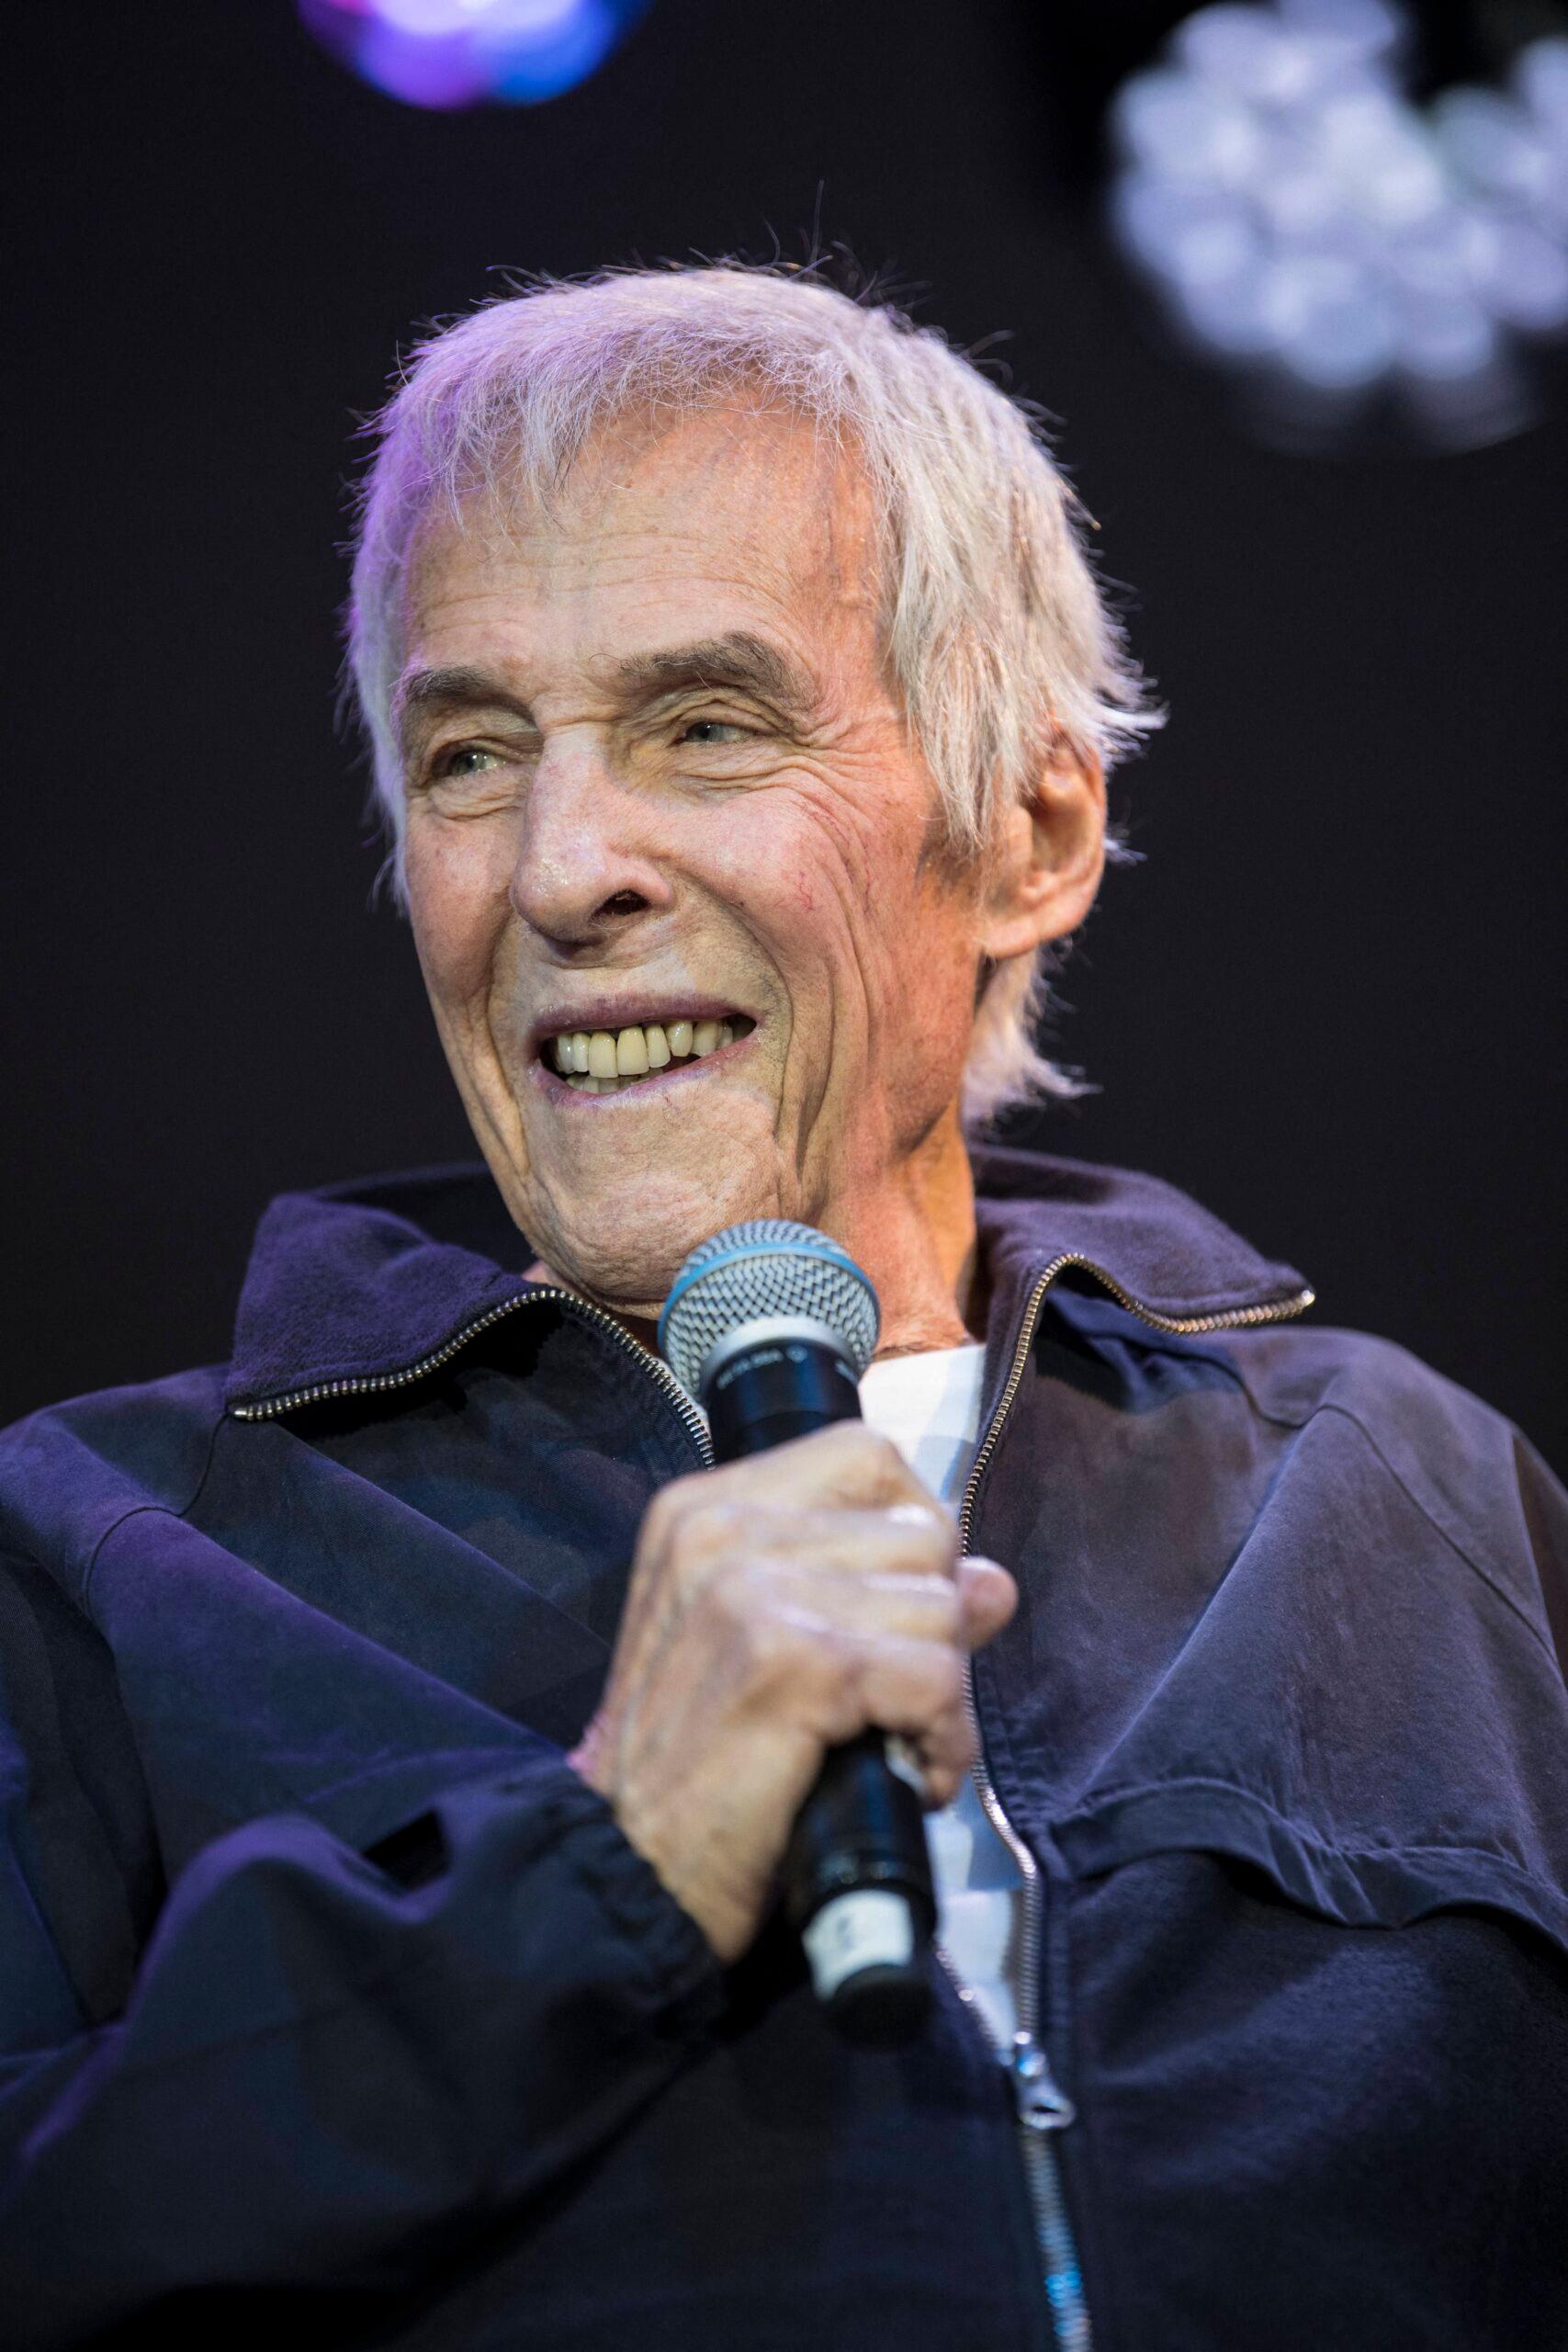 Burt Bacharach Only Had $200,000 In 'Personal Property' At Time Of His Death